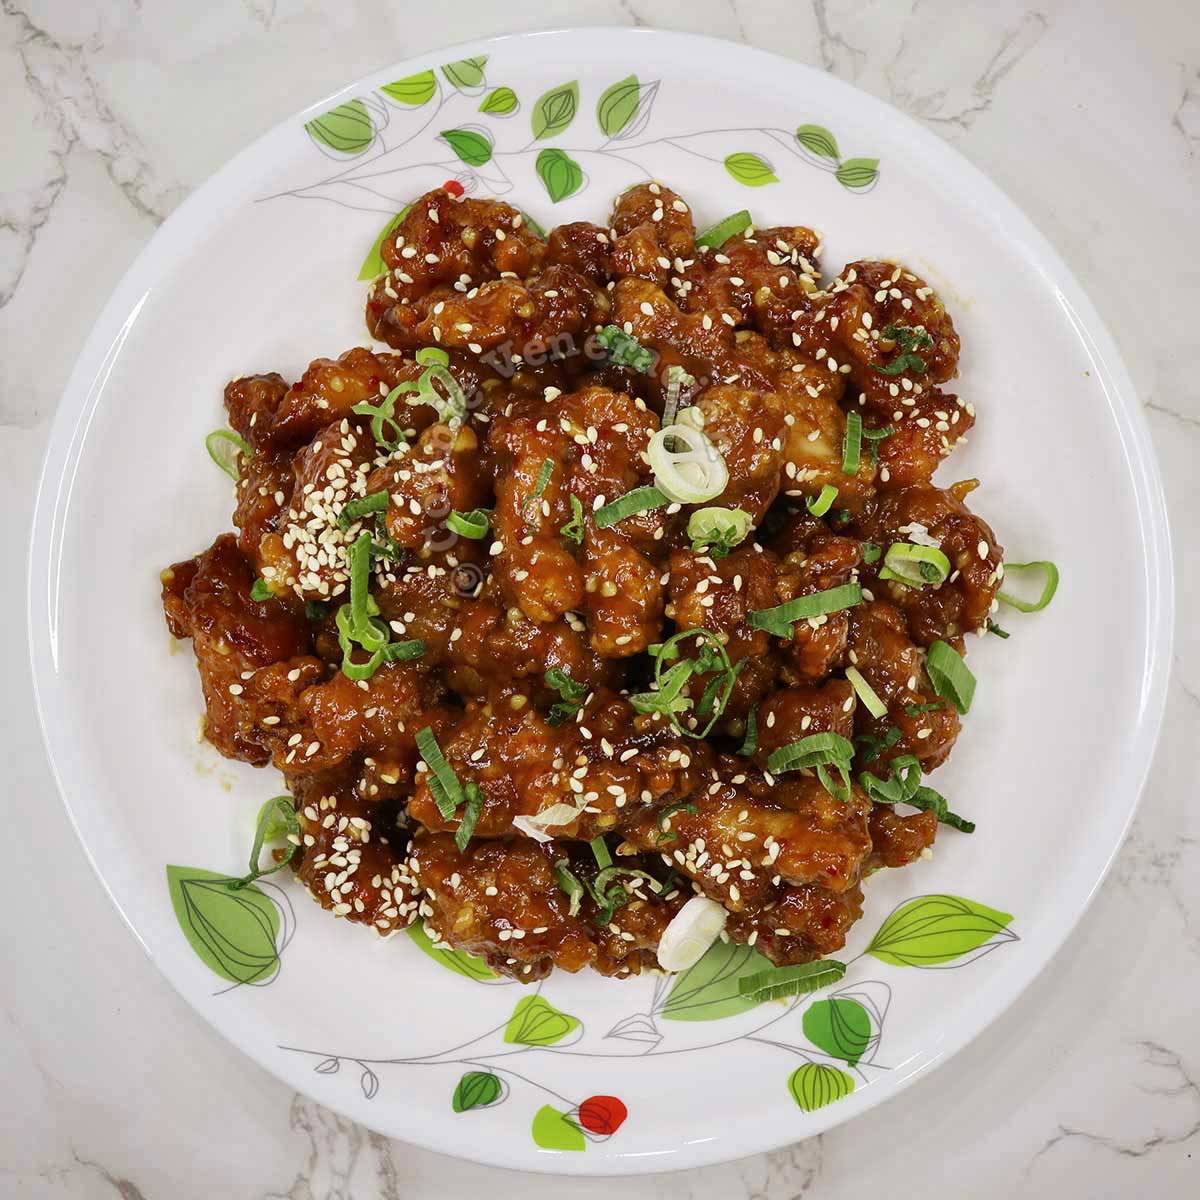 General Tso's chicken garnished with scallions and sesame seeds